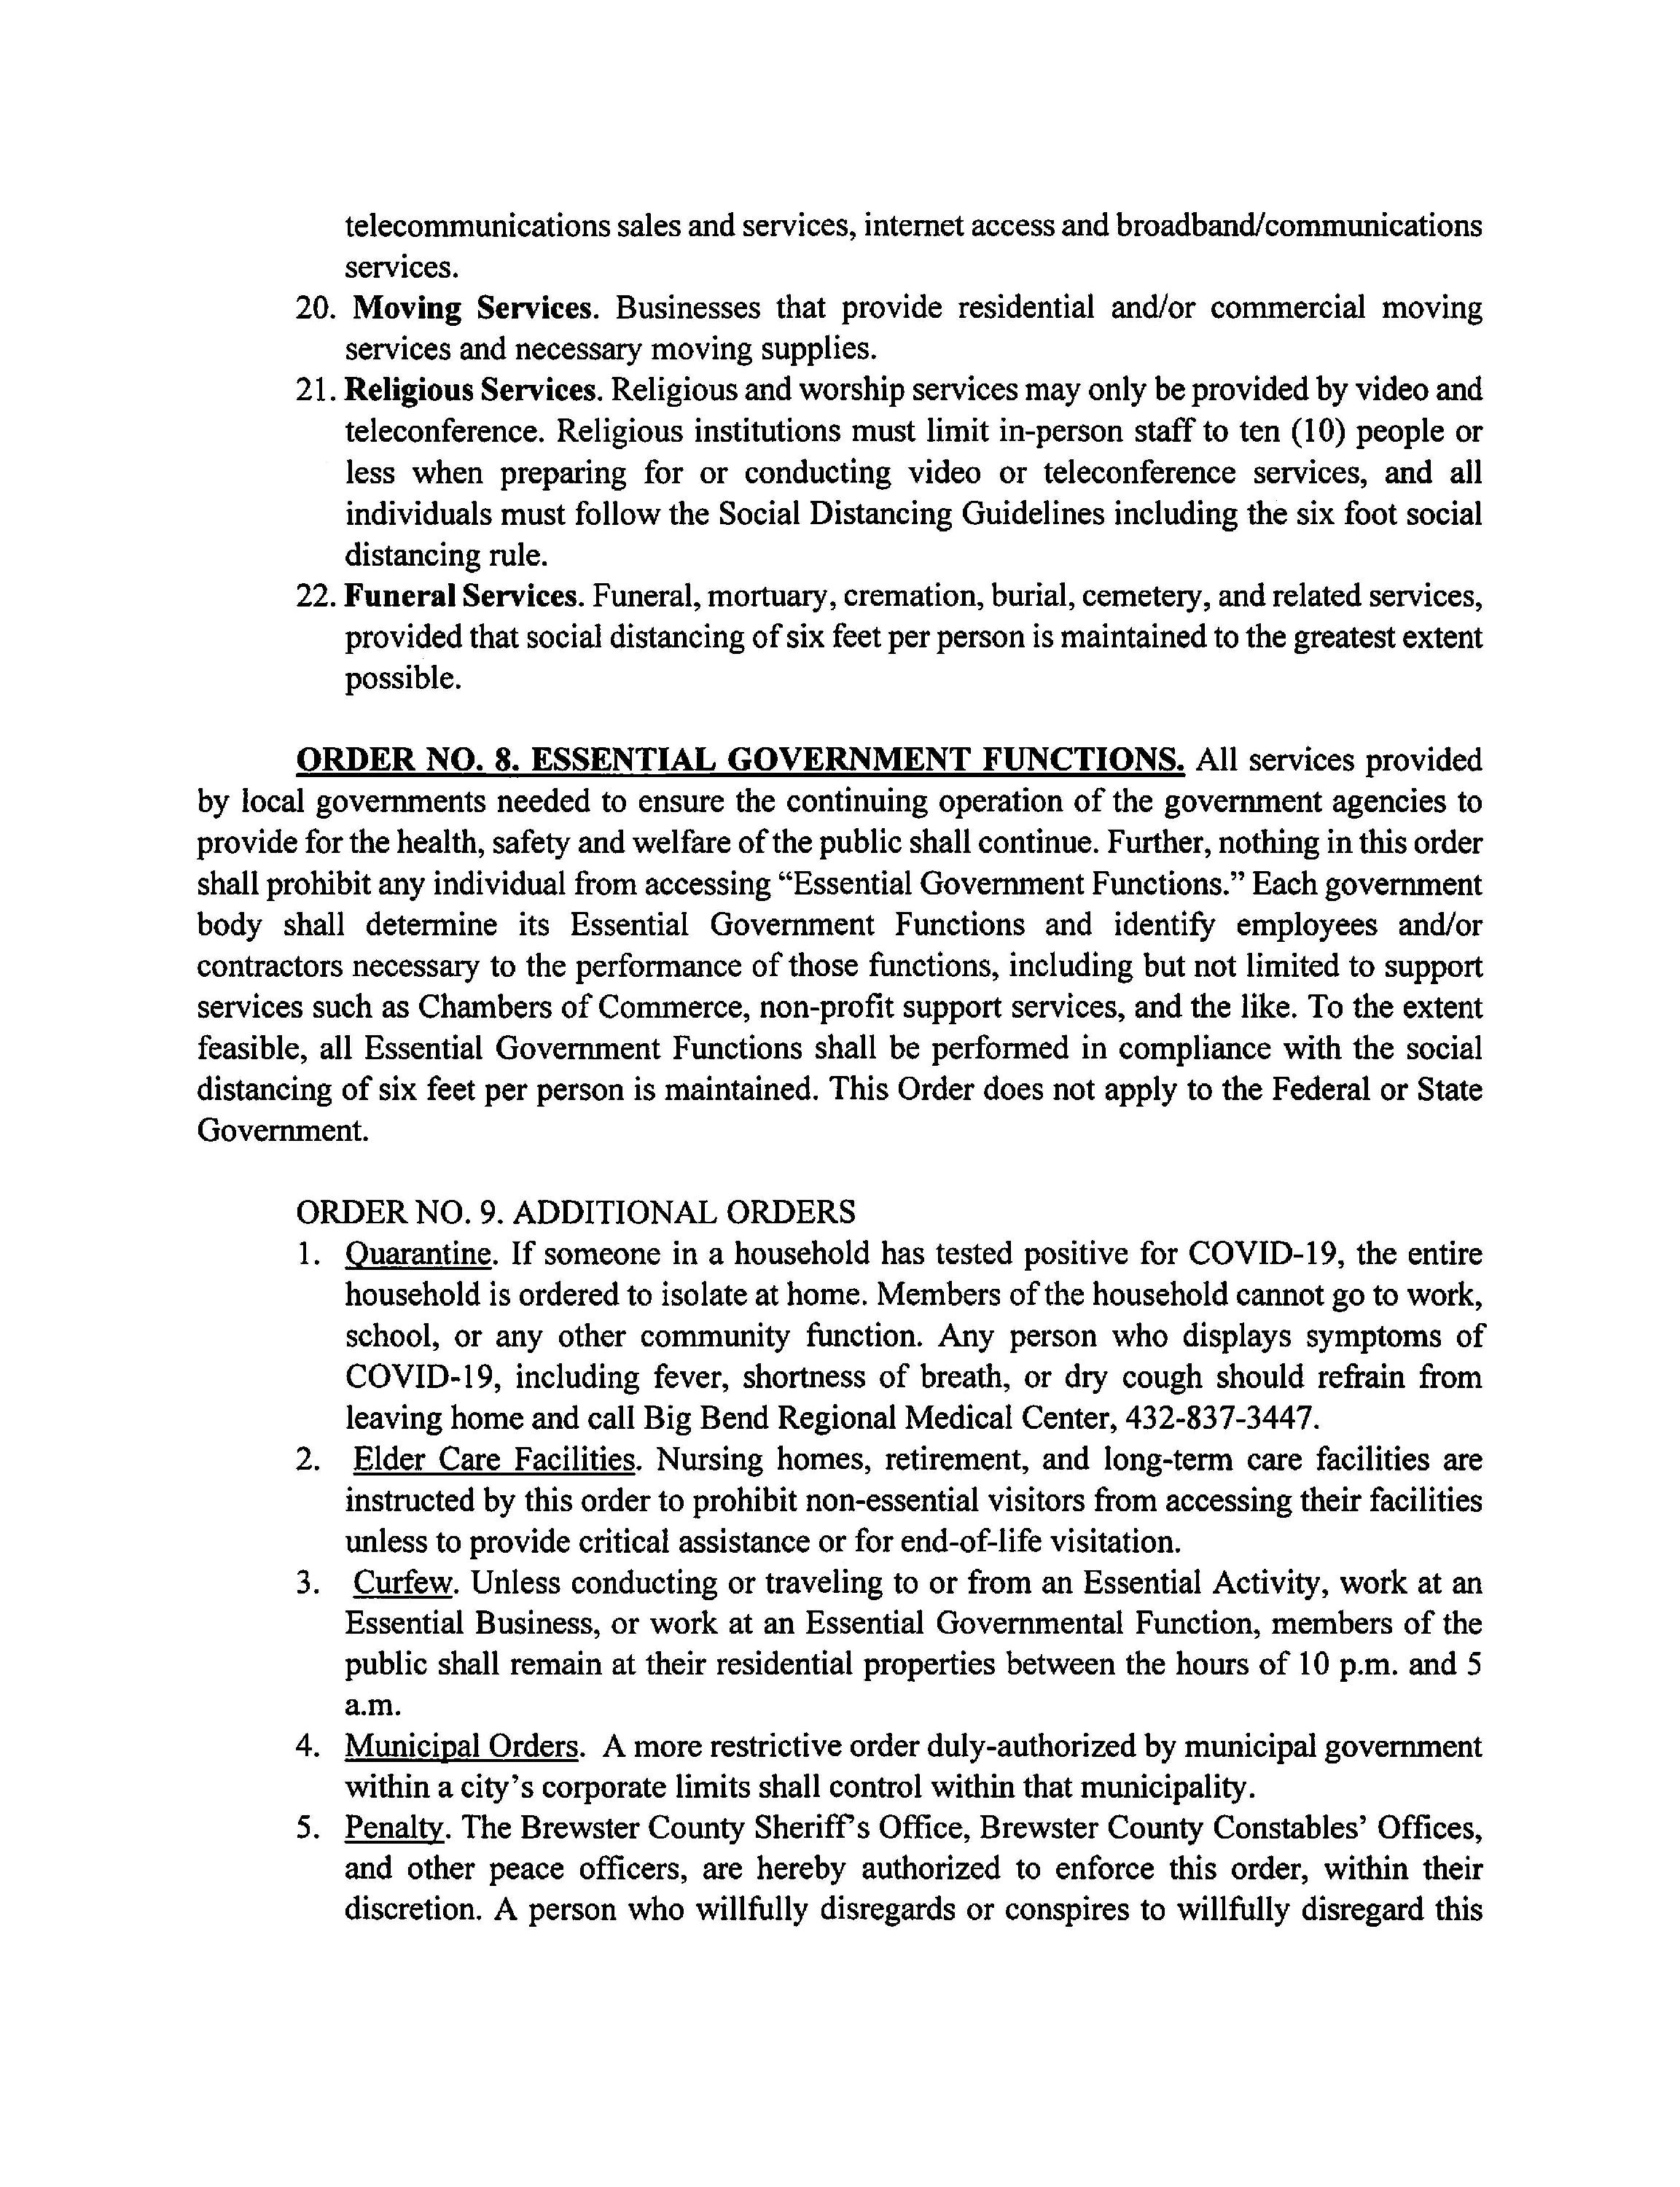 Orders Extending Supplemental on Shelter in Place & Declaration (1)_Page_6